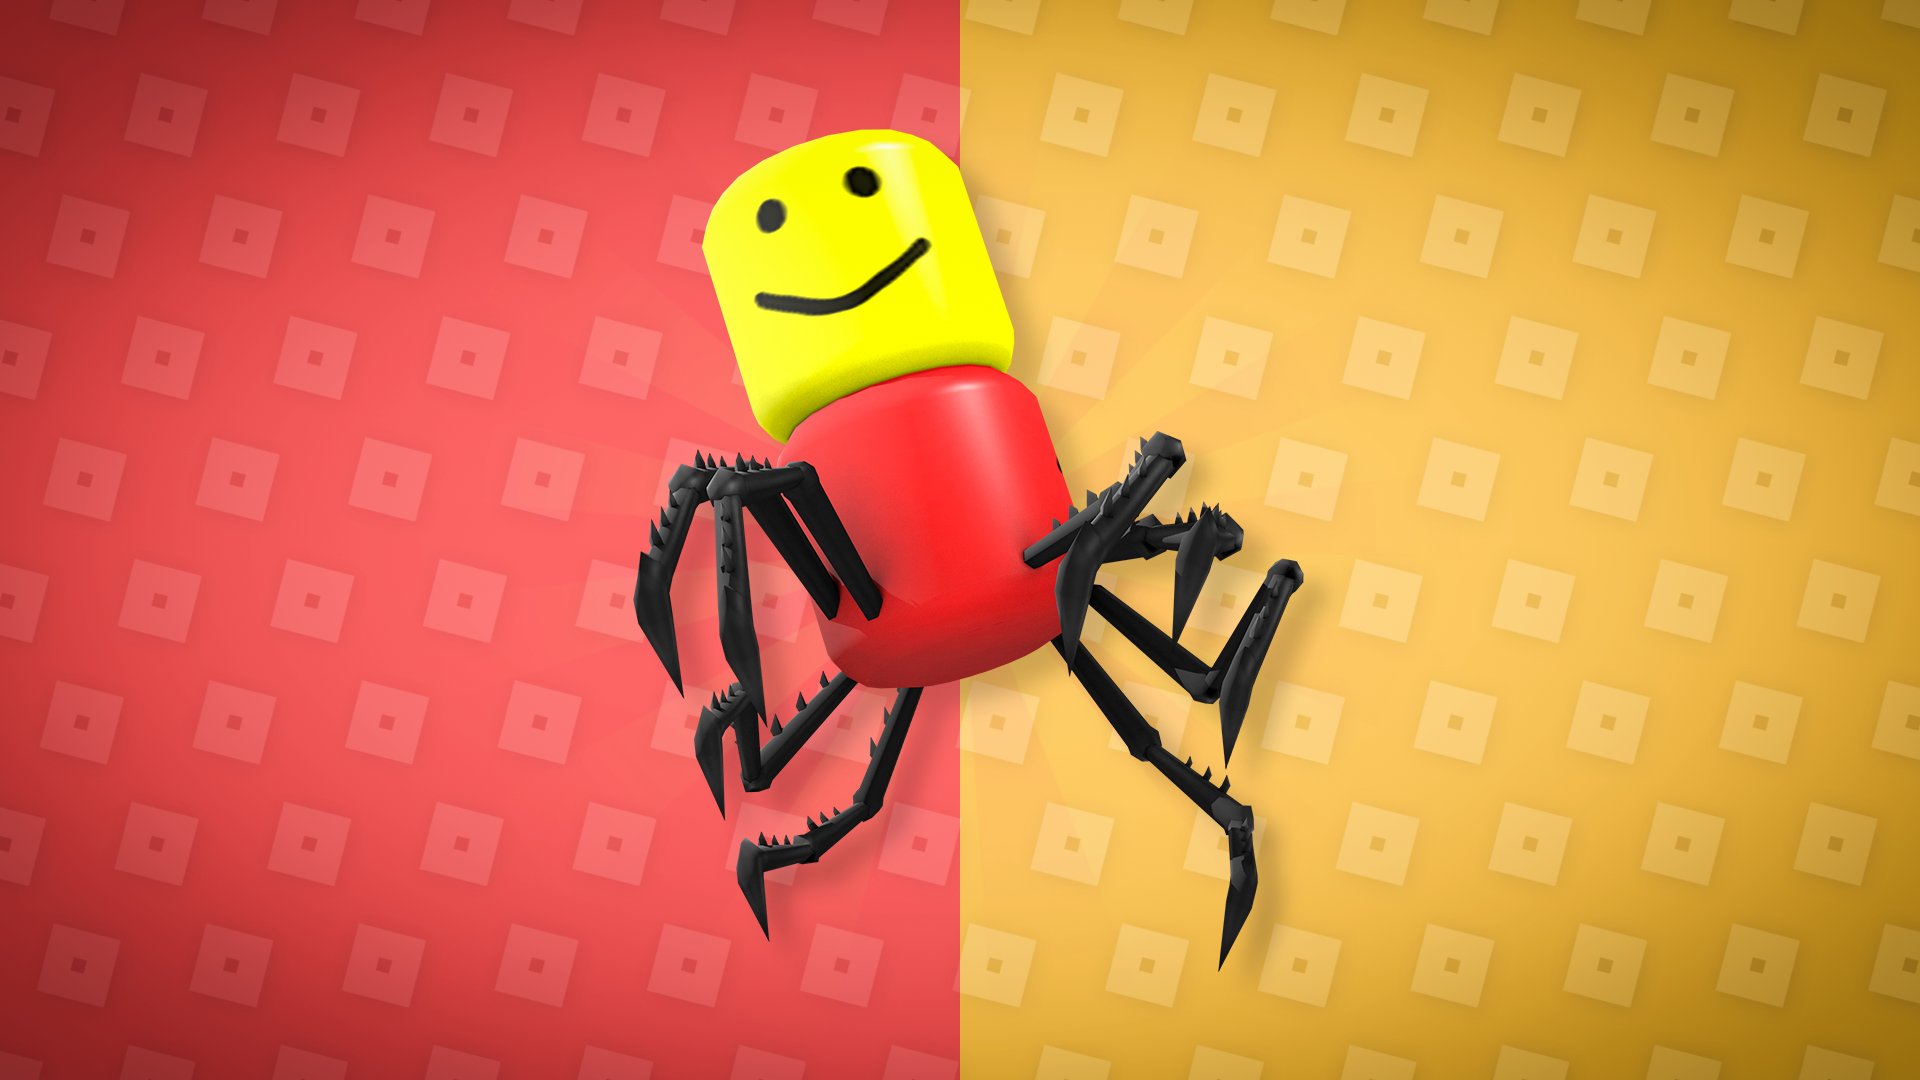 Rbxnews On Twitter Soon When You Purchase Roblox Gift Cards Directly From The Official Site You May Receive The Hanging Despacito Spider Through A Bonus Code Official Site Https T Co Vmbd6lbqjx Hanging Despacito Spider - roblox how to make despacito spider